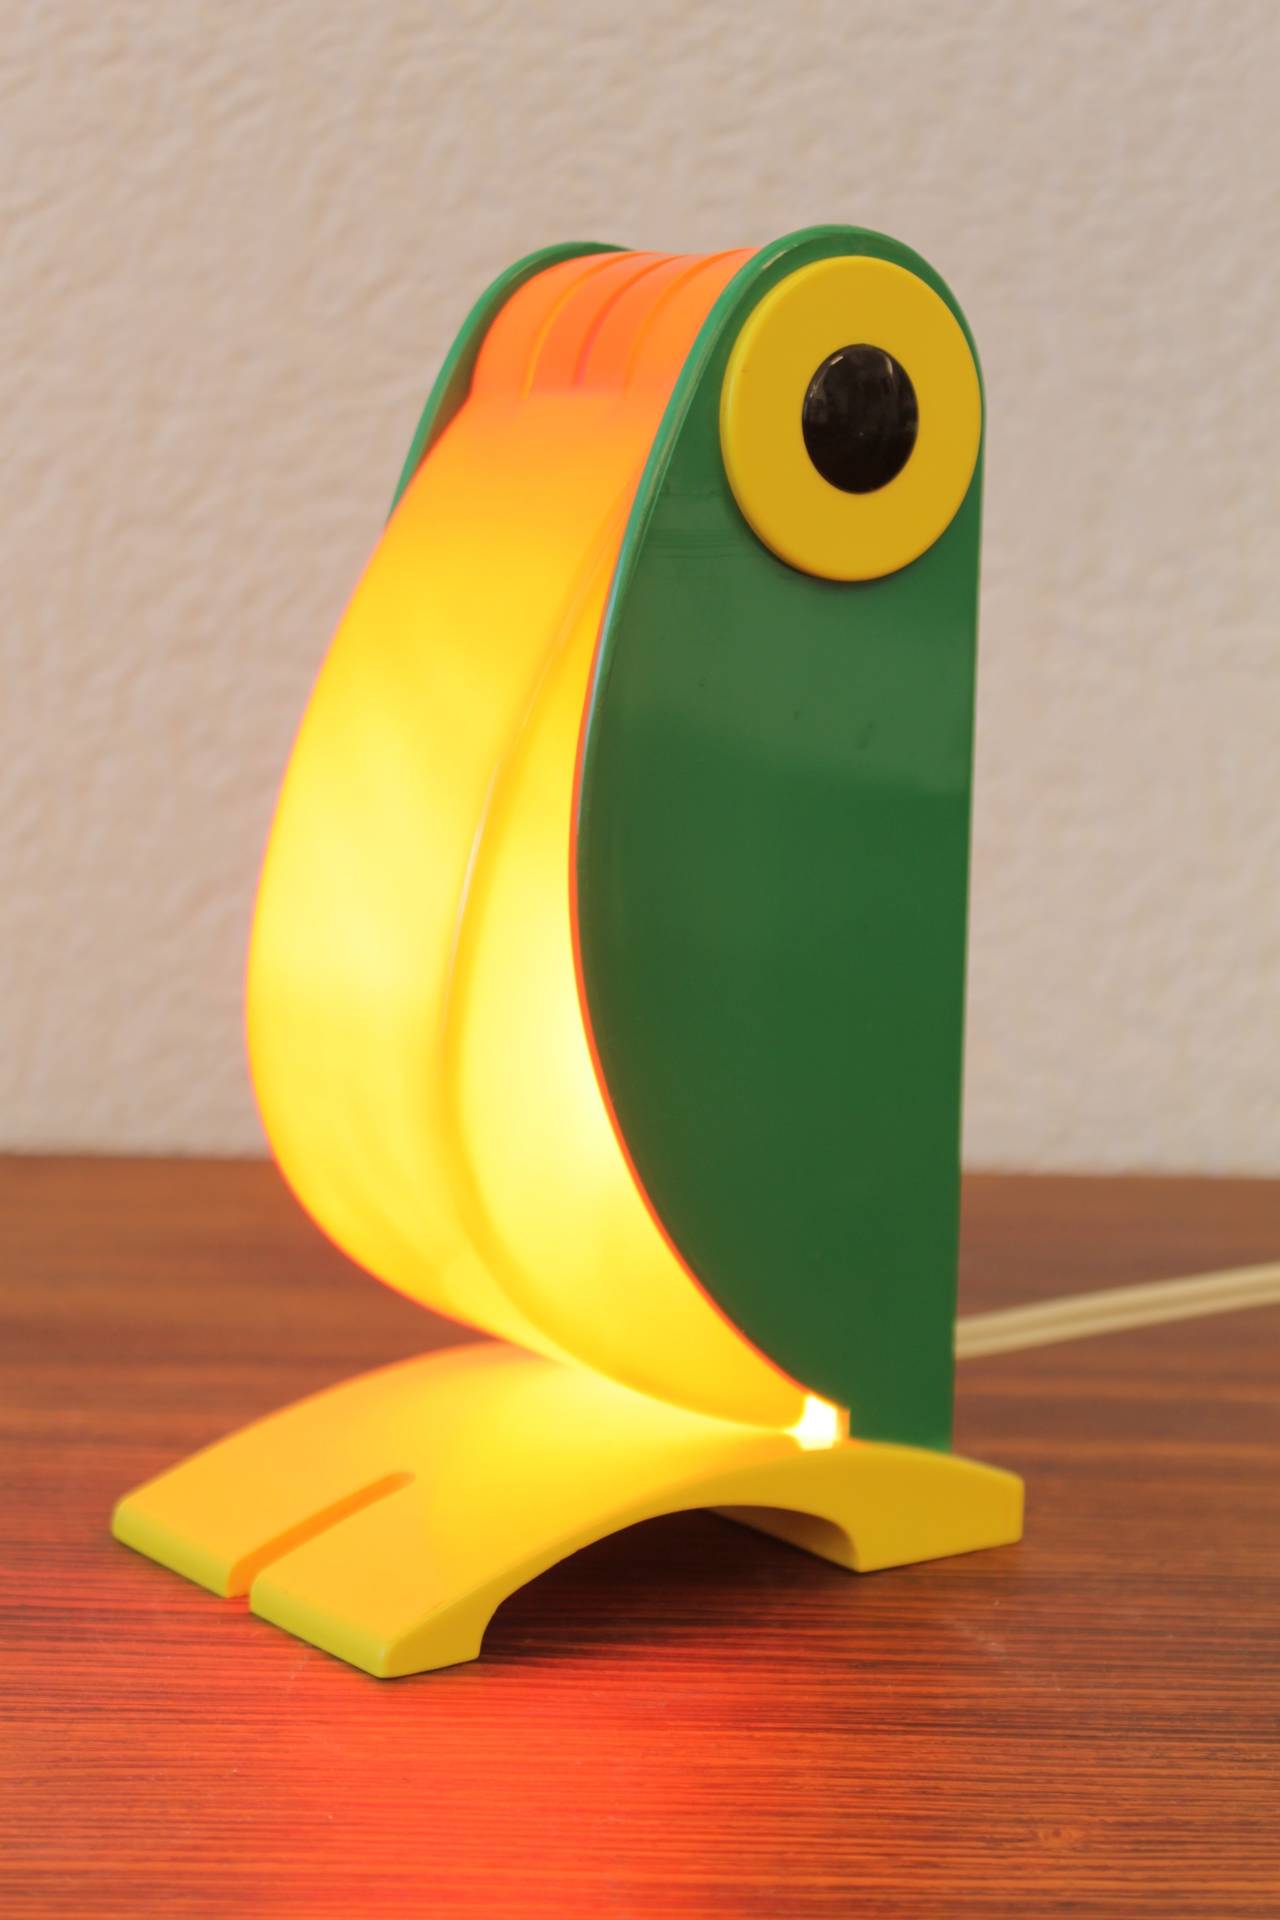 Toucan lamp made by Old Timer Ferrari, Verona ca.1970
Perfect condtion.